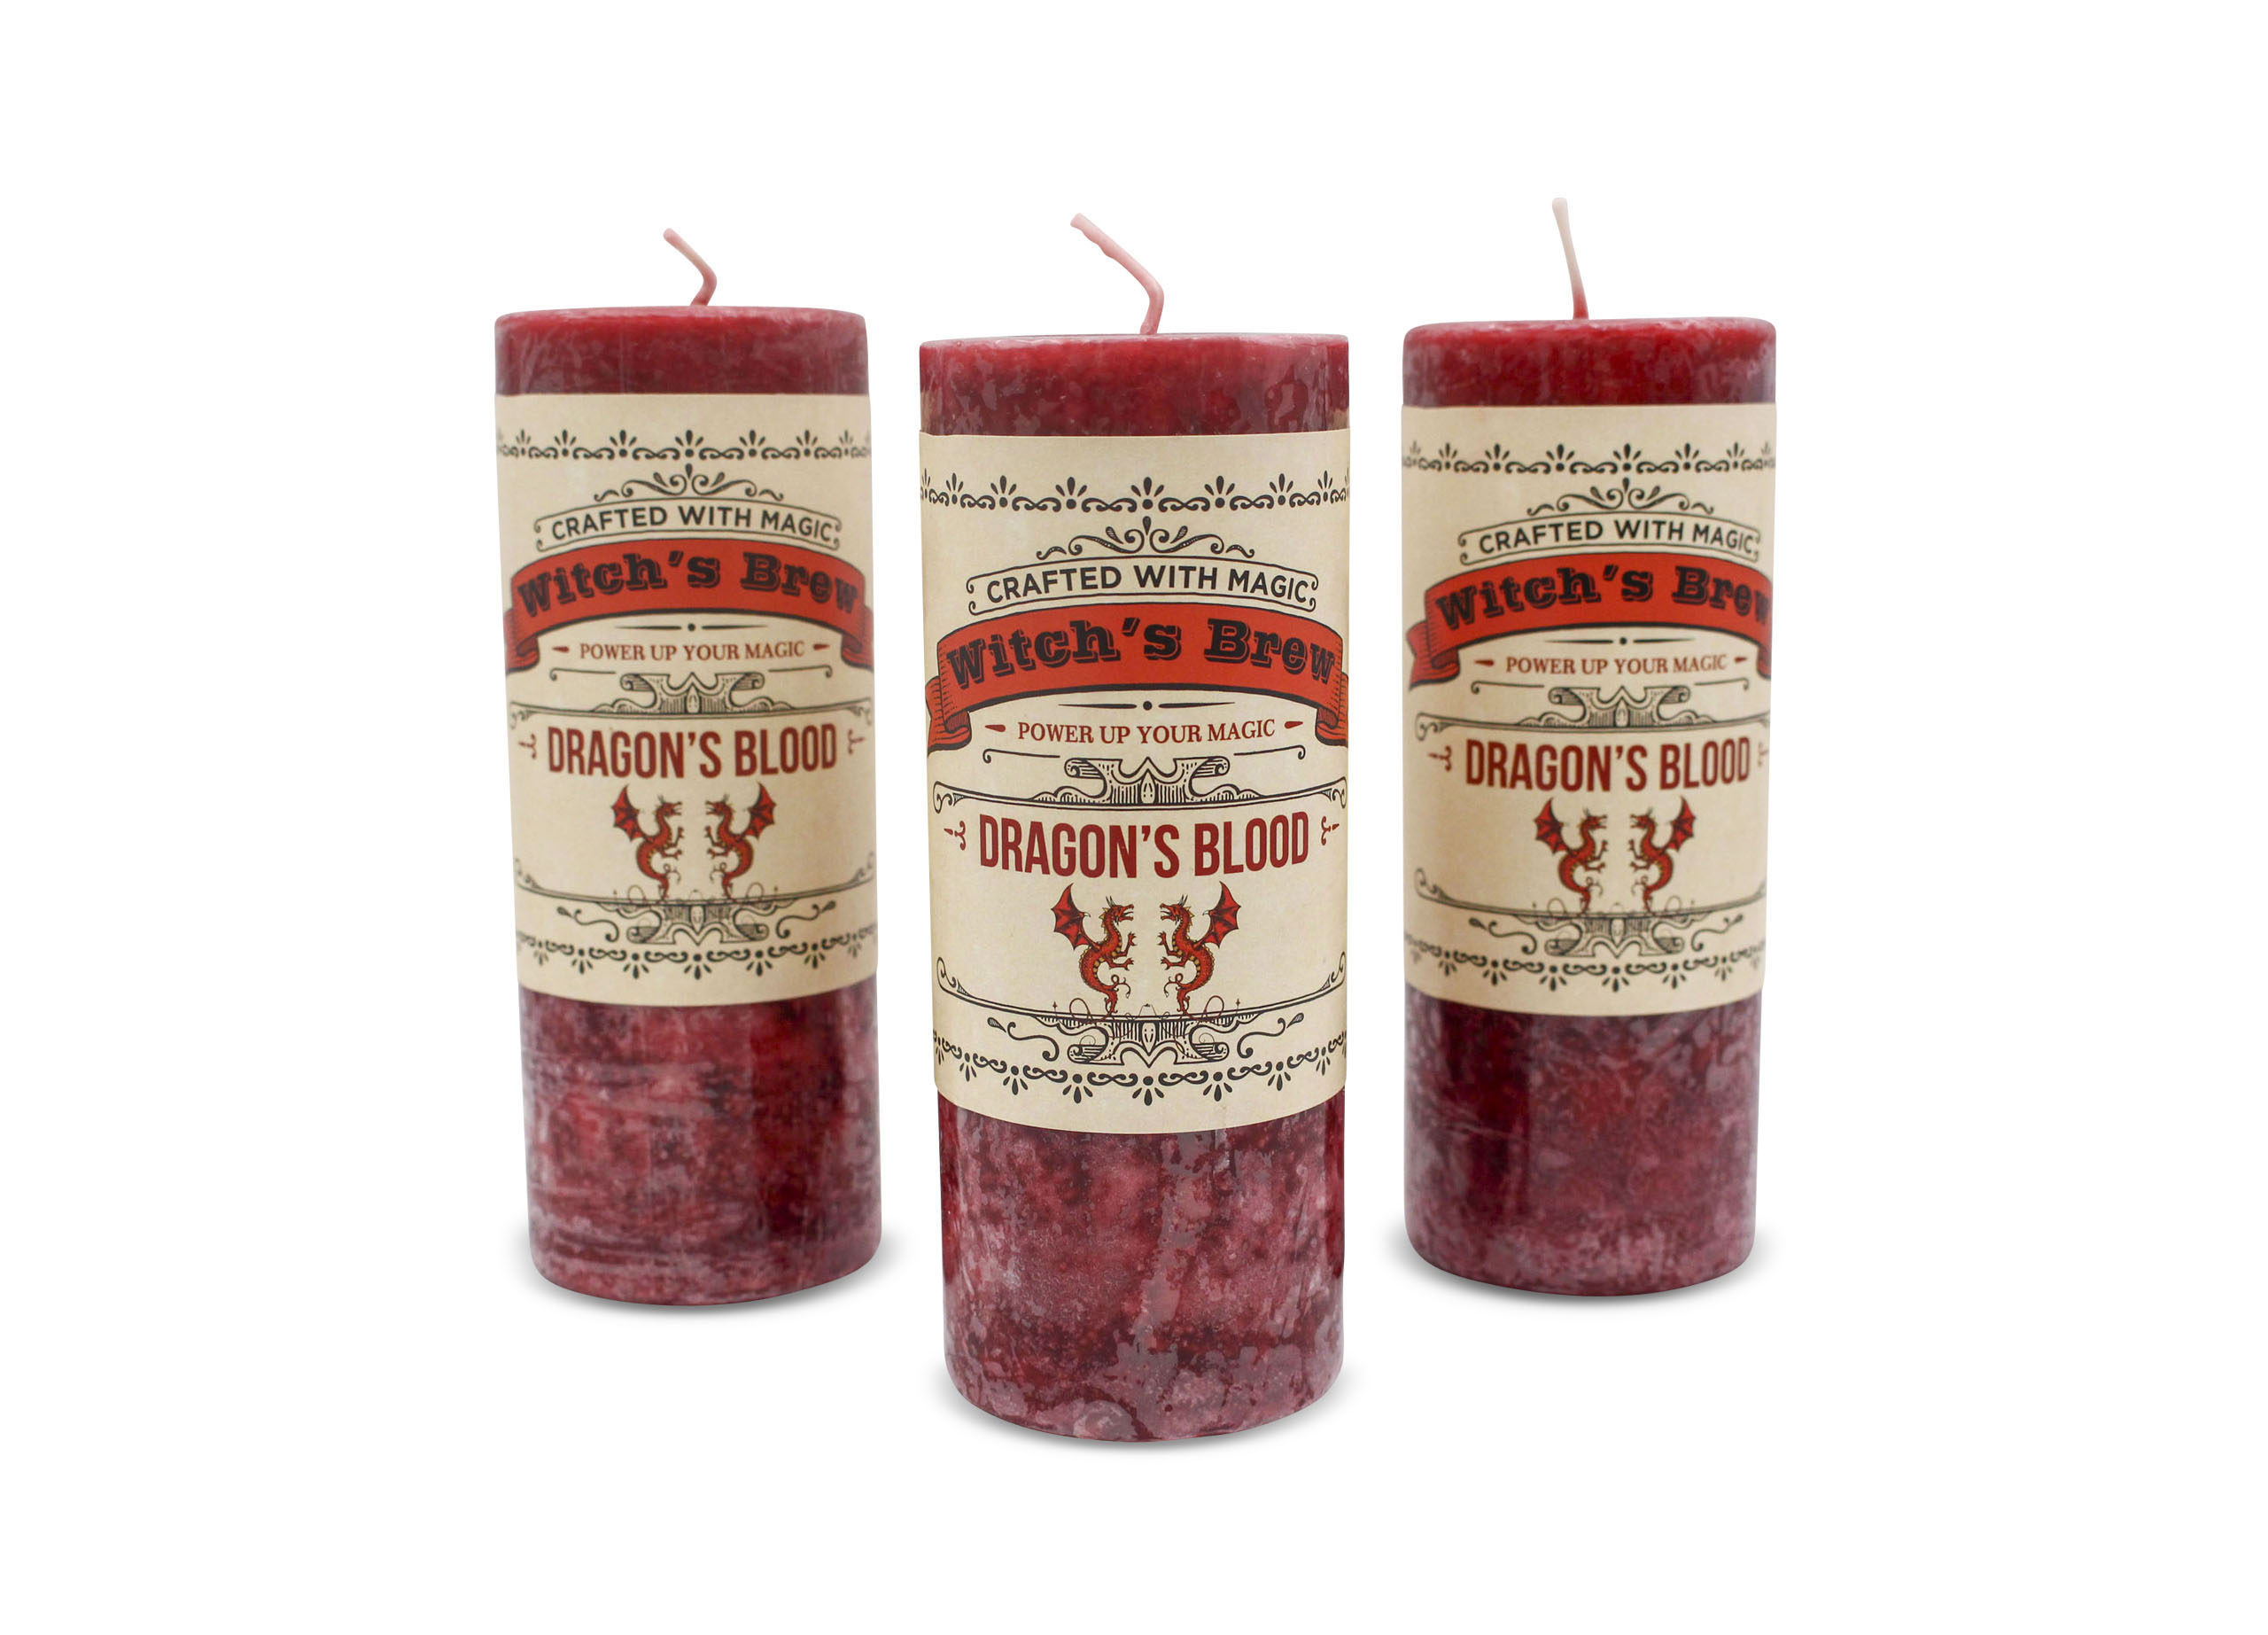 Dragon's Blood Spell Candle - Crystal Dreams